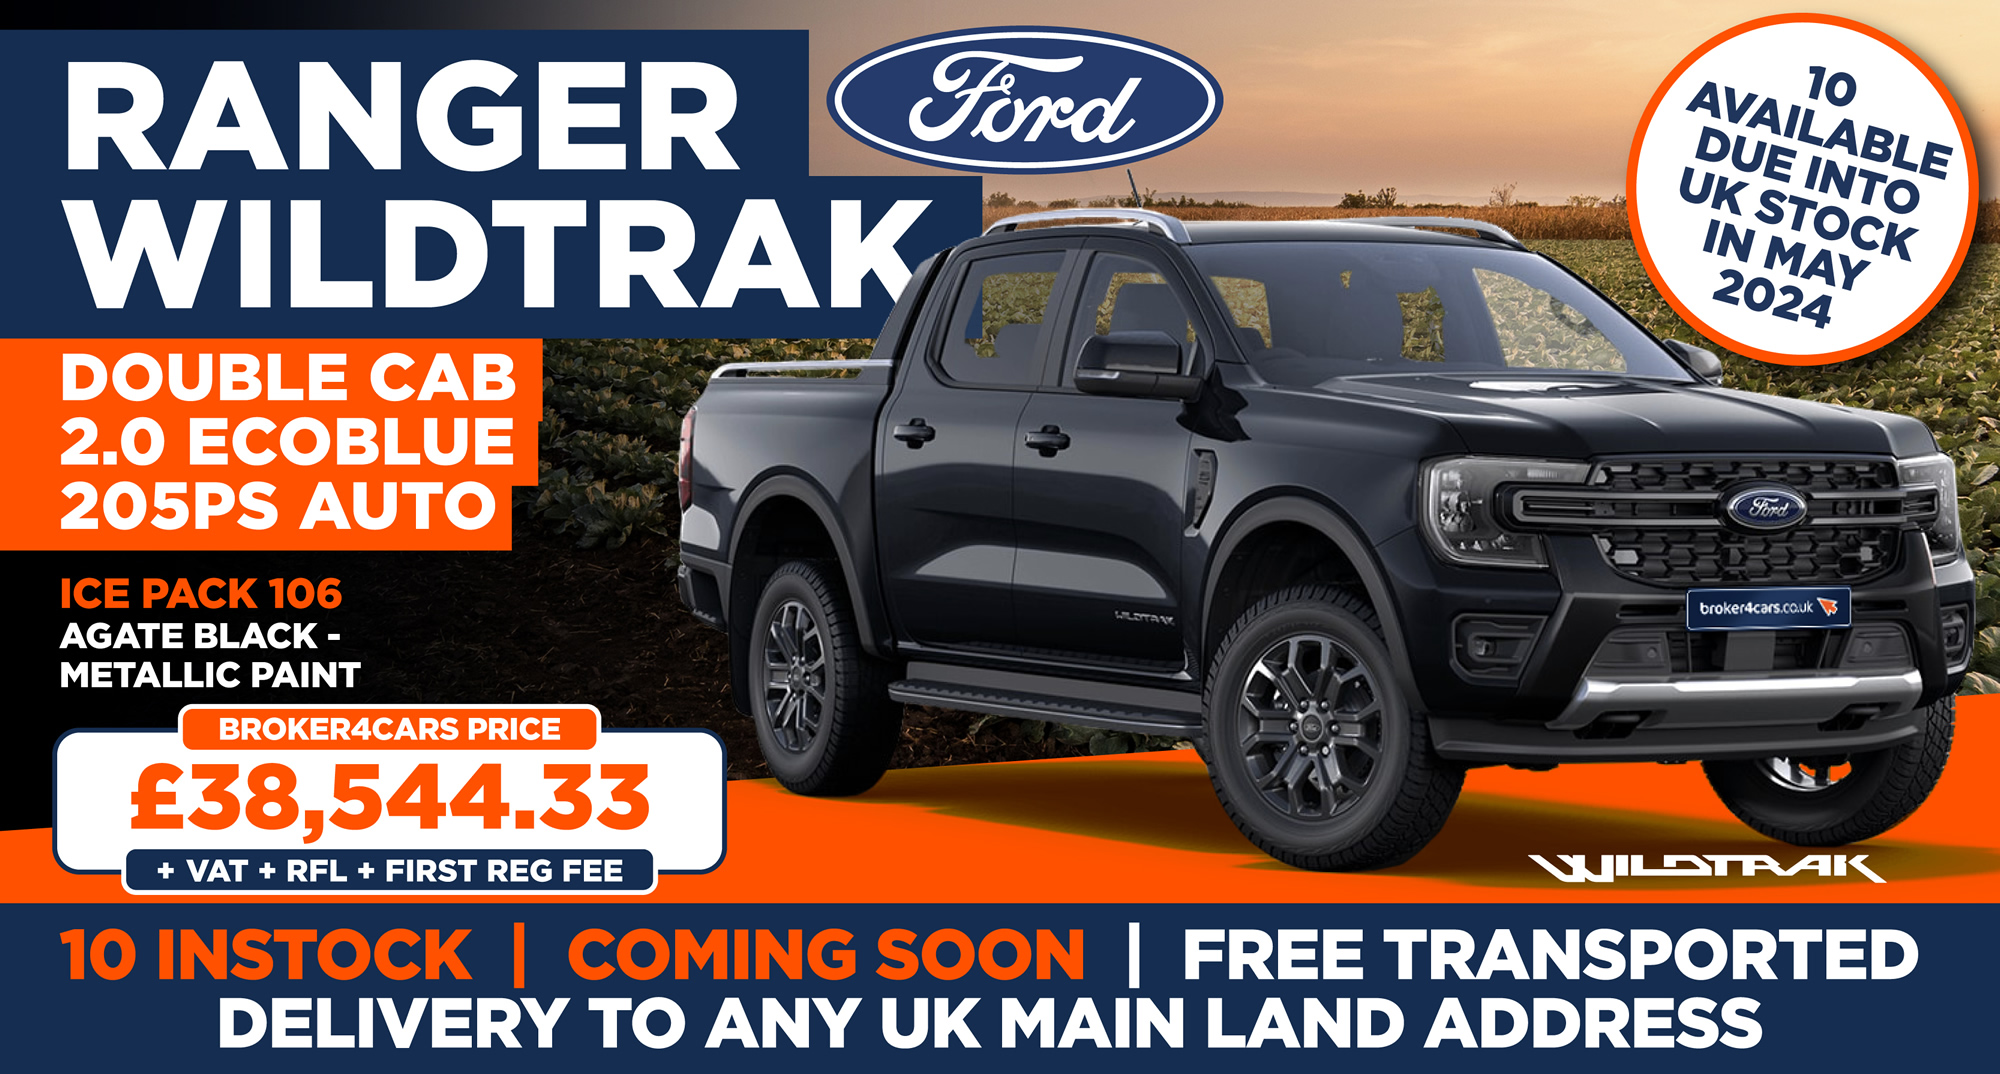 Ford Ranger Double Cab Wildtrak 2.0 EcoBlue 205ps AutoAgate Black Metallic Paint, ICE Pack 106, 10 Available due into UK Stock in May 2024. Free Transported Delivery to any UK Mainland Address